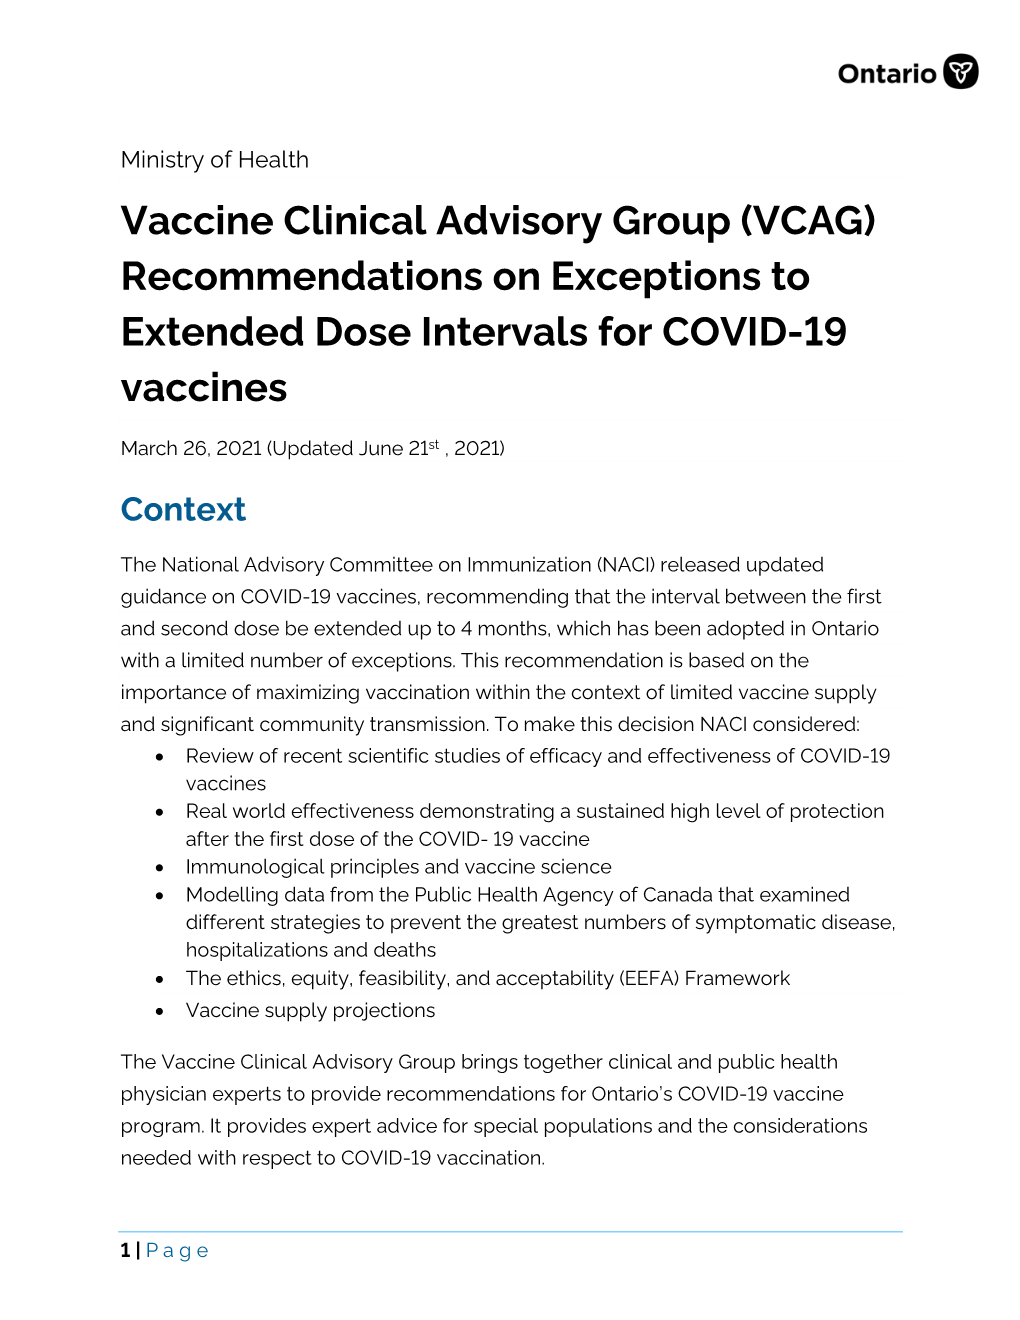 Vaccine Clinical Advisory Group Recommendation on Extended Doses